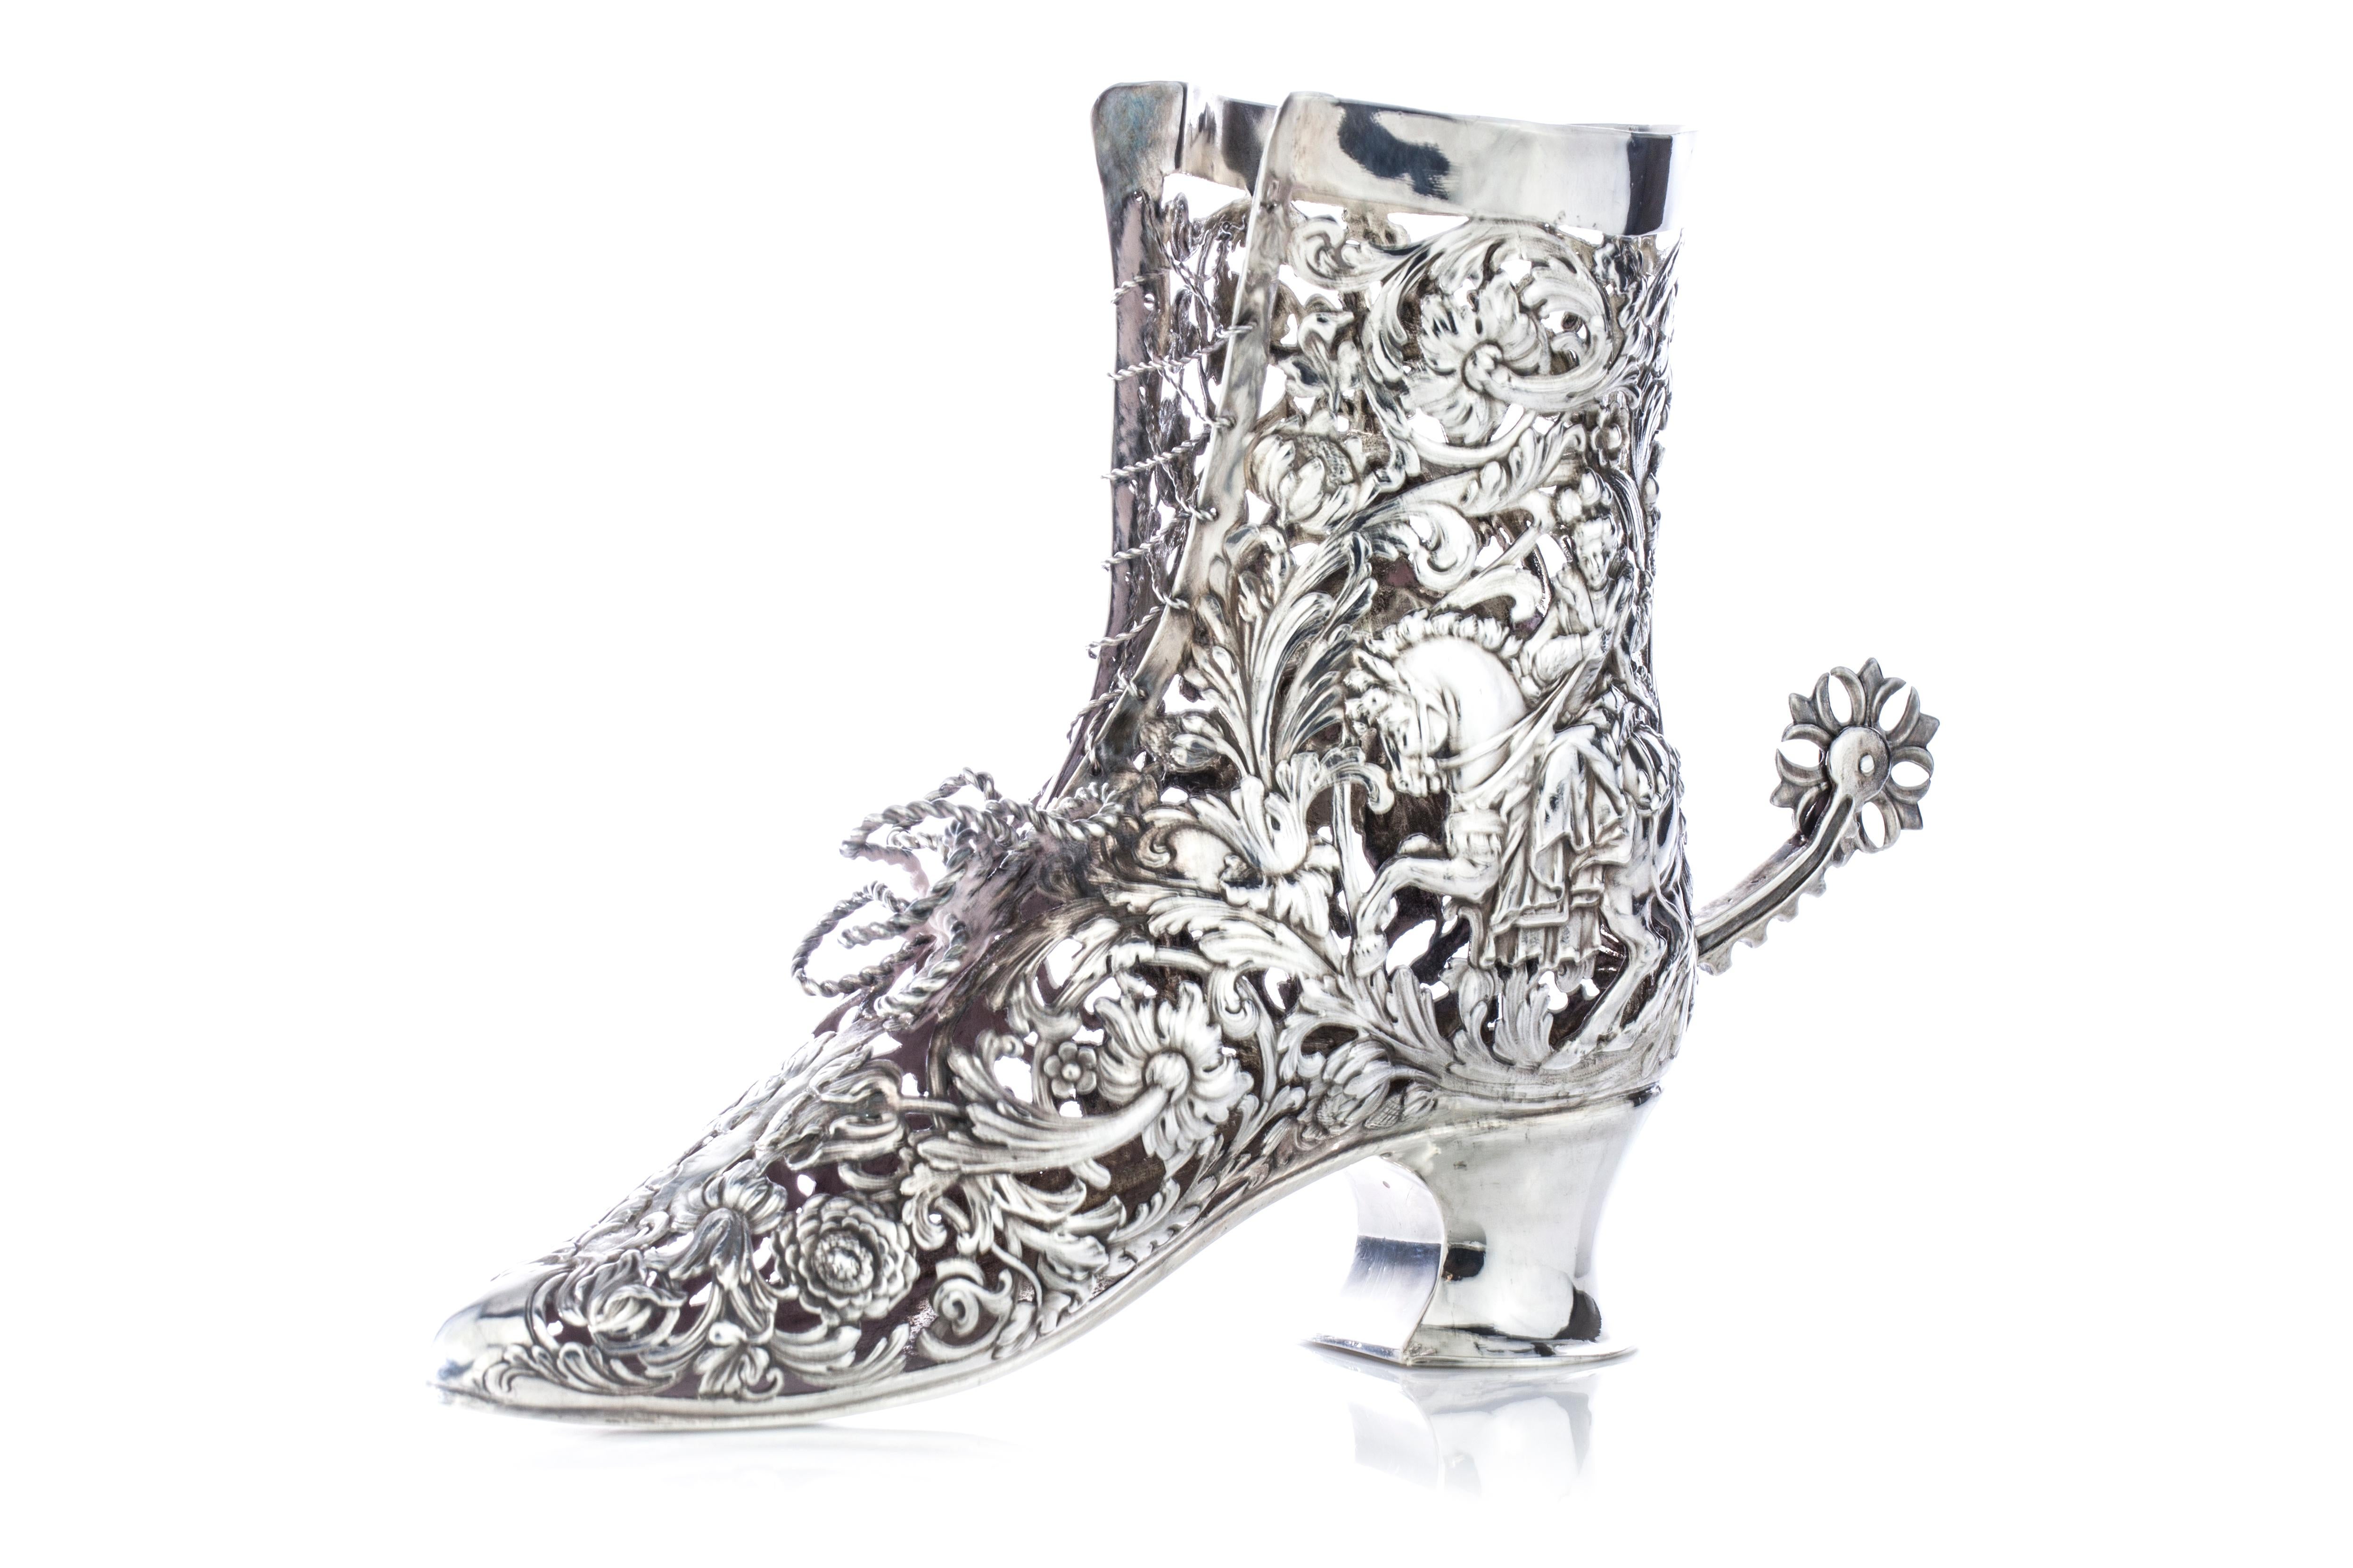 Antique German Hanau silver vase in a shape of a shoe

Please note no glass liner.
Made in Germany, 19th century
Imported to Scotland, Glasgow, 1903
Maker: B. Neresheimer & Sohne
Fully hallmarked.

B. Neresheimer & Sohne, Hanau
Founded